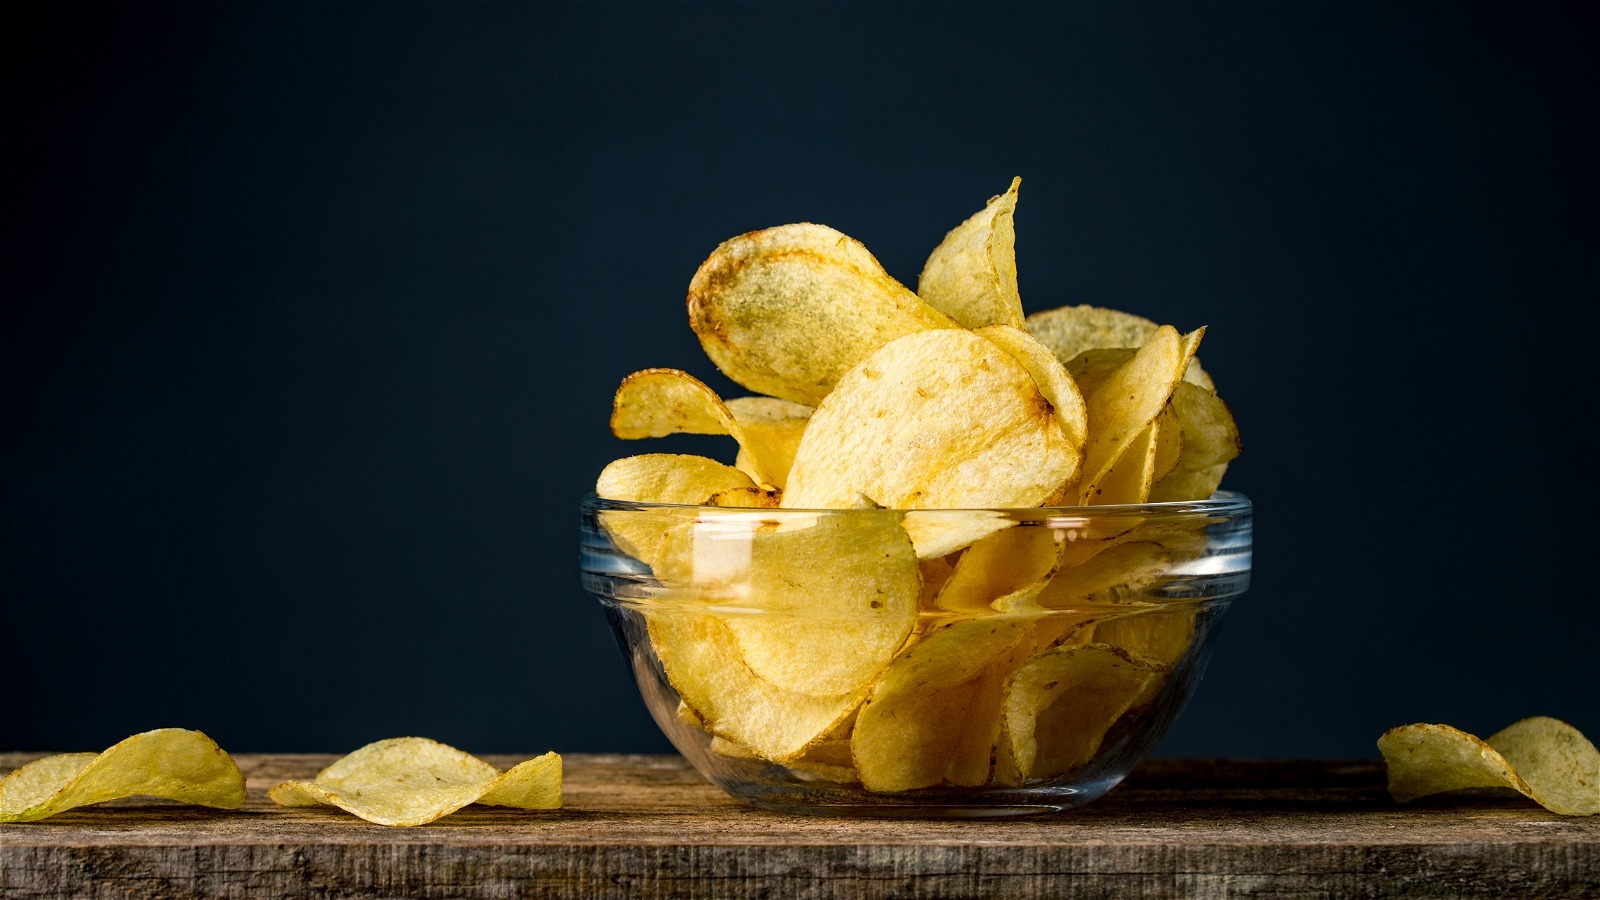 Get those Bags of Chips Off the Pantry Shelf - A New Way to Organize Bags  of Chips